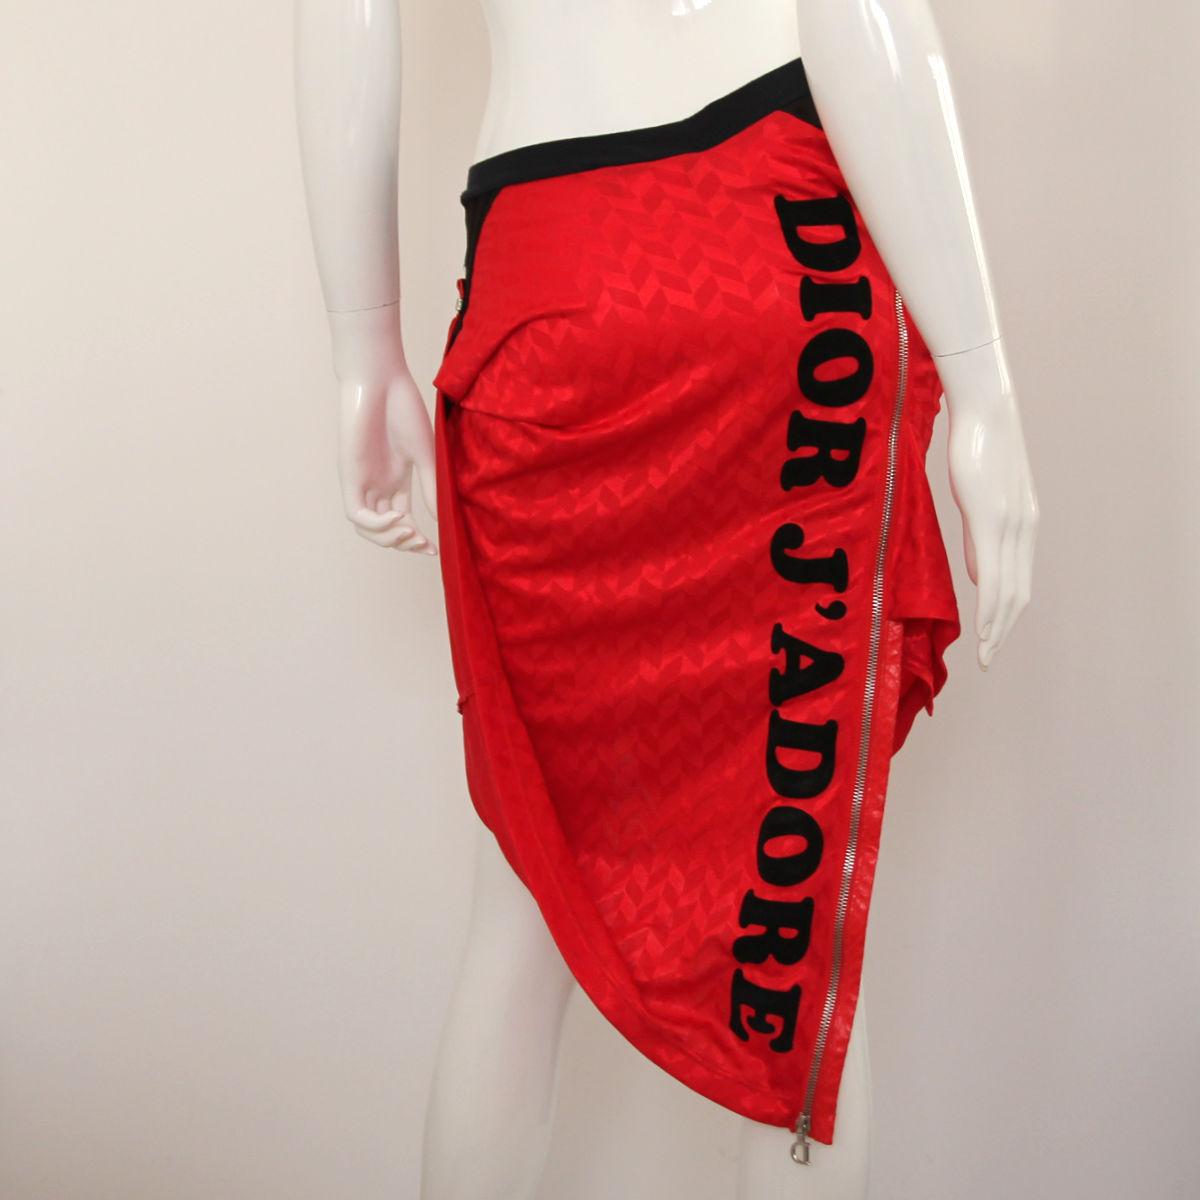 CHRISTIAN DIOR 
 
2001. Red jersey-look skirt from Christian Dior by John Galliano - Dior J'adore 6. 

With black flock print.

Get the unmistakable Dior look of the Galliano era. 
Buy Now Or Cry Later!
 
The skirt is in good condition (see photos).